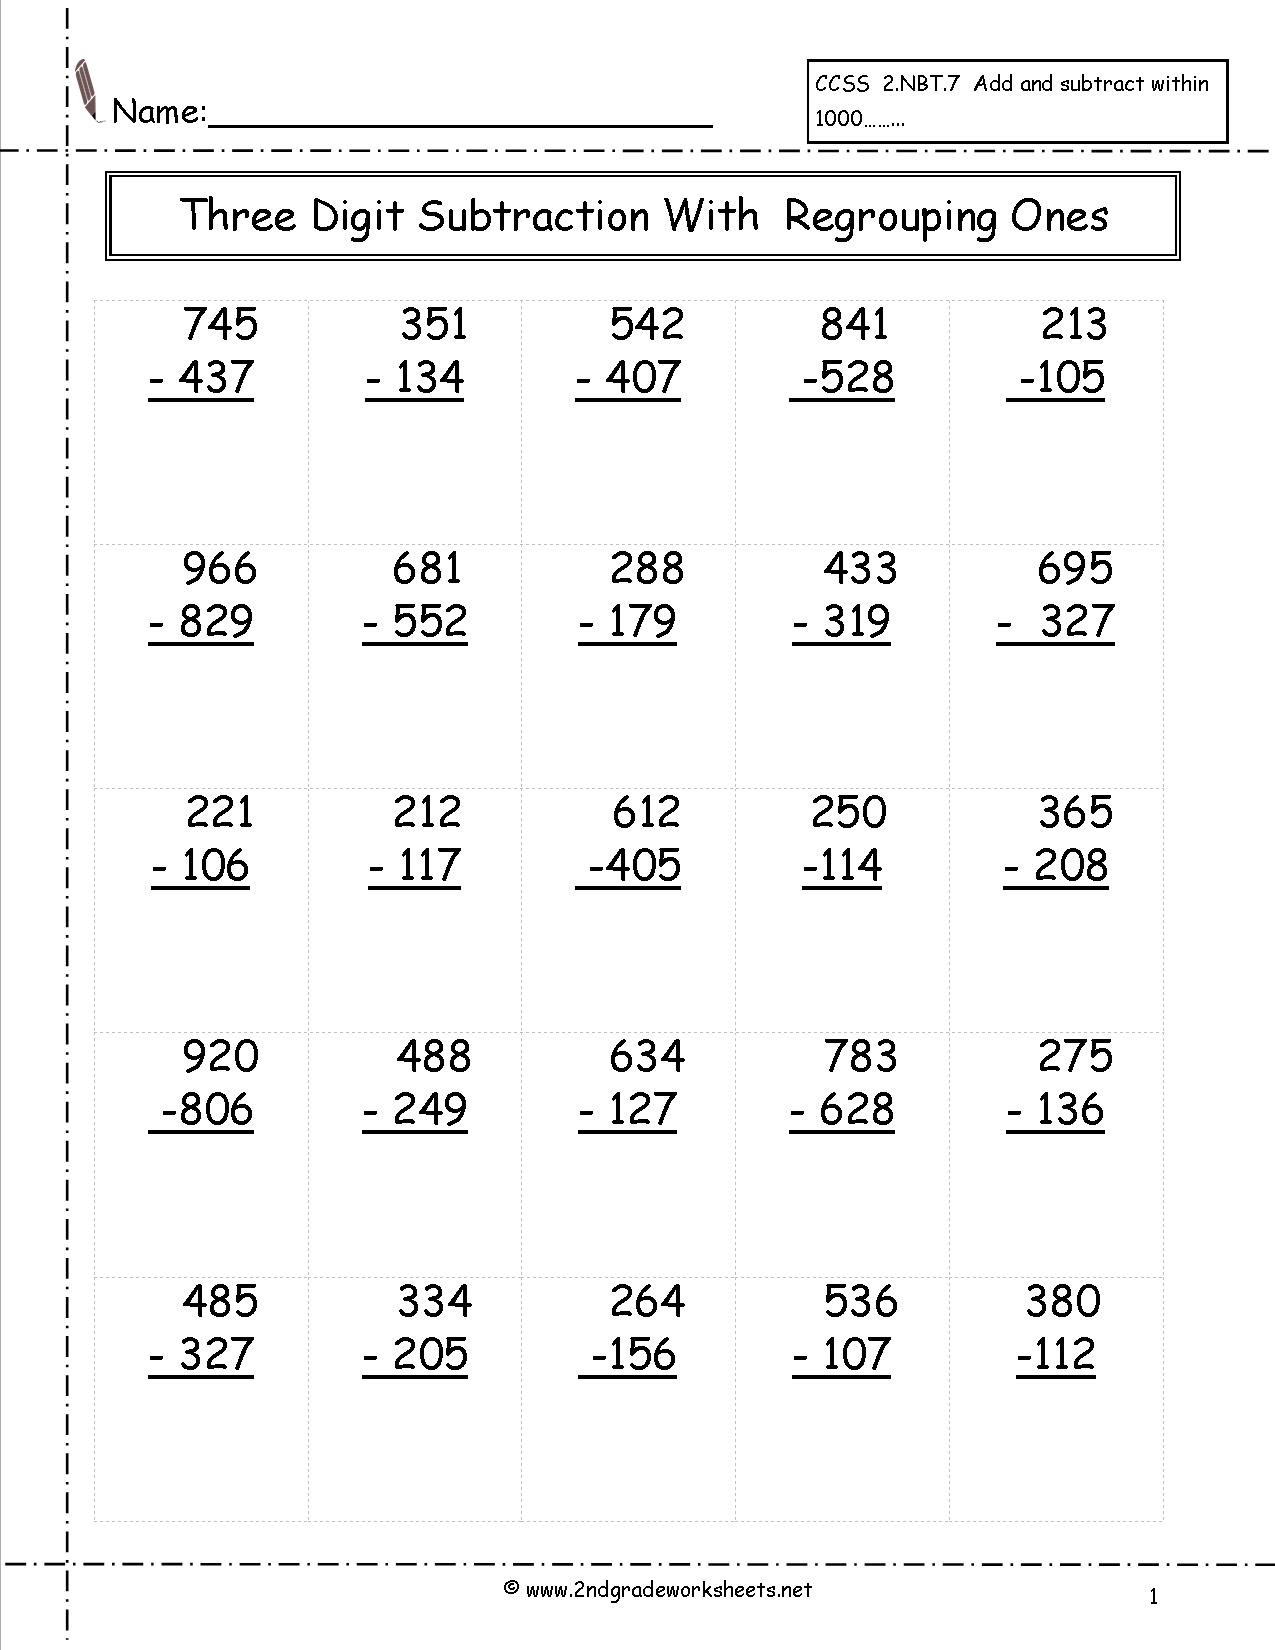 Regrouping Subtraction Worksheets 3rd Grade Three Digit Subtraction Worksheets